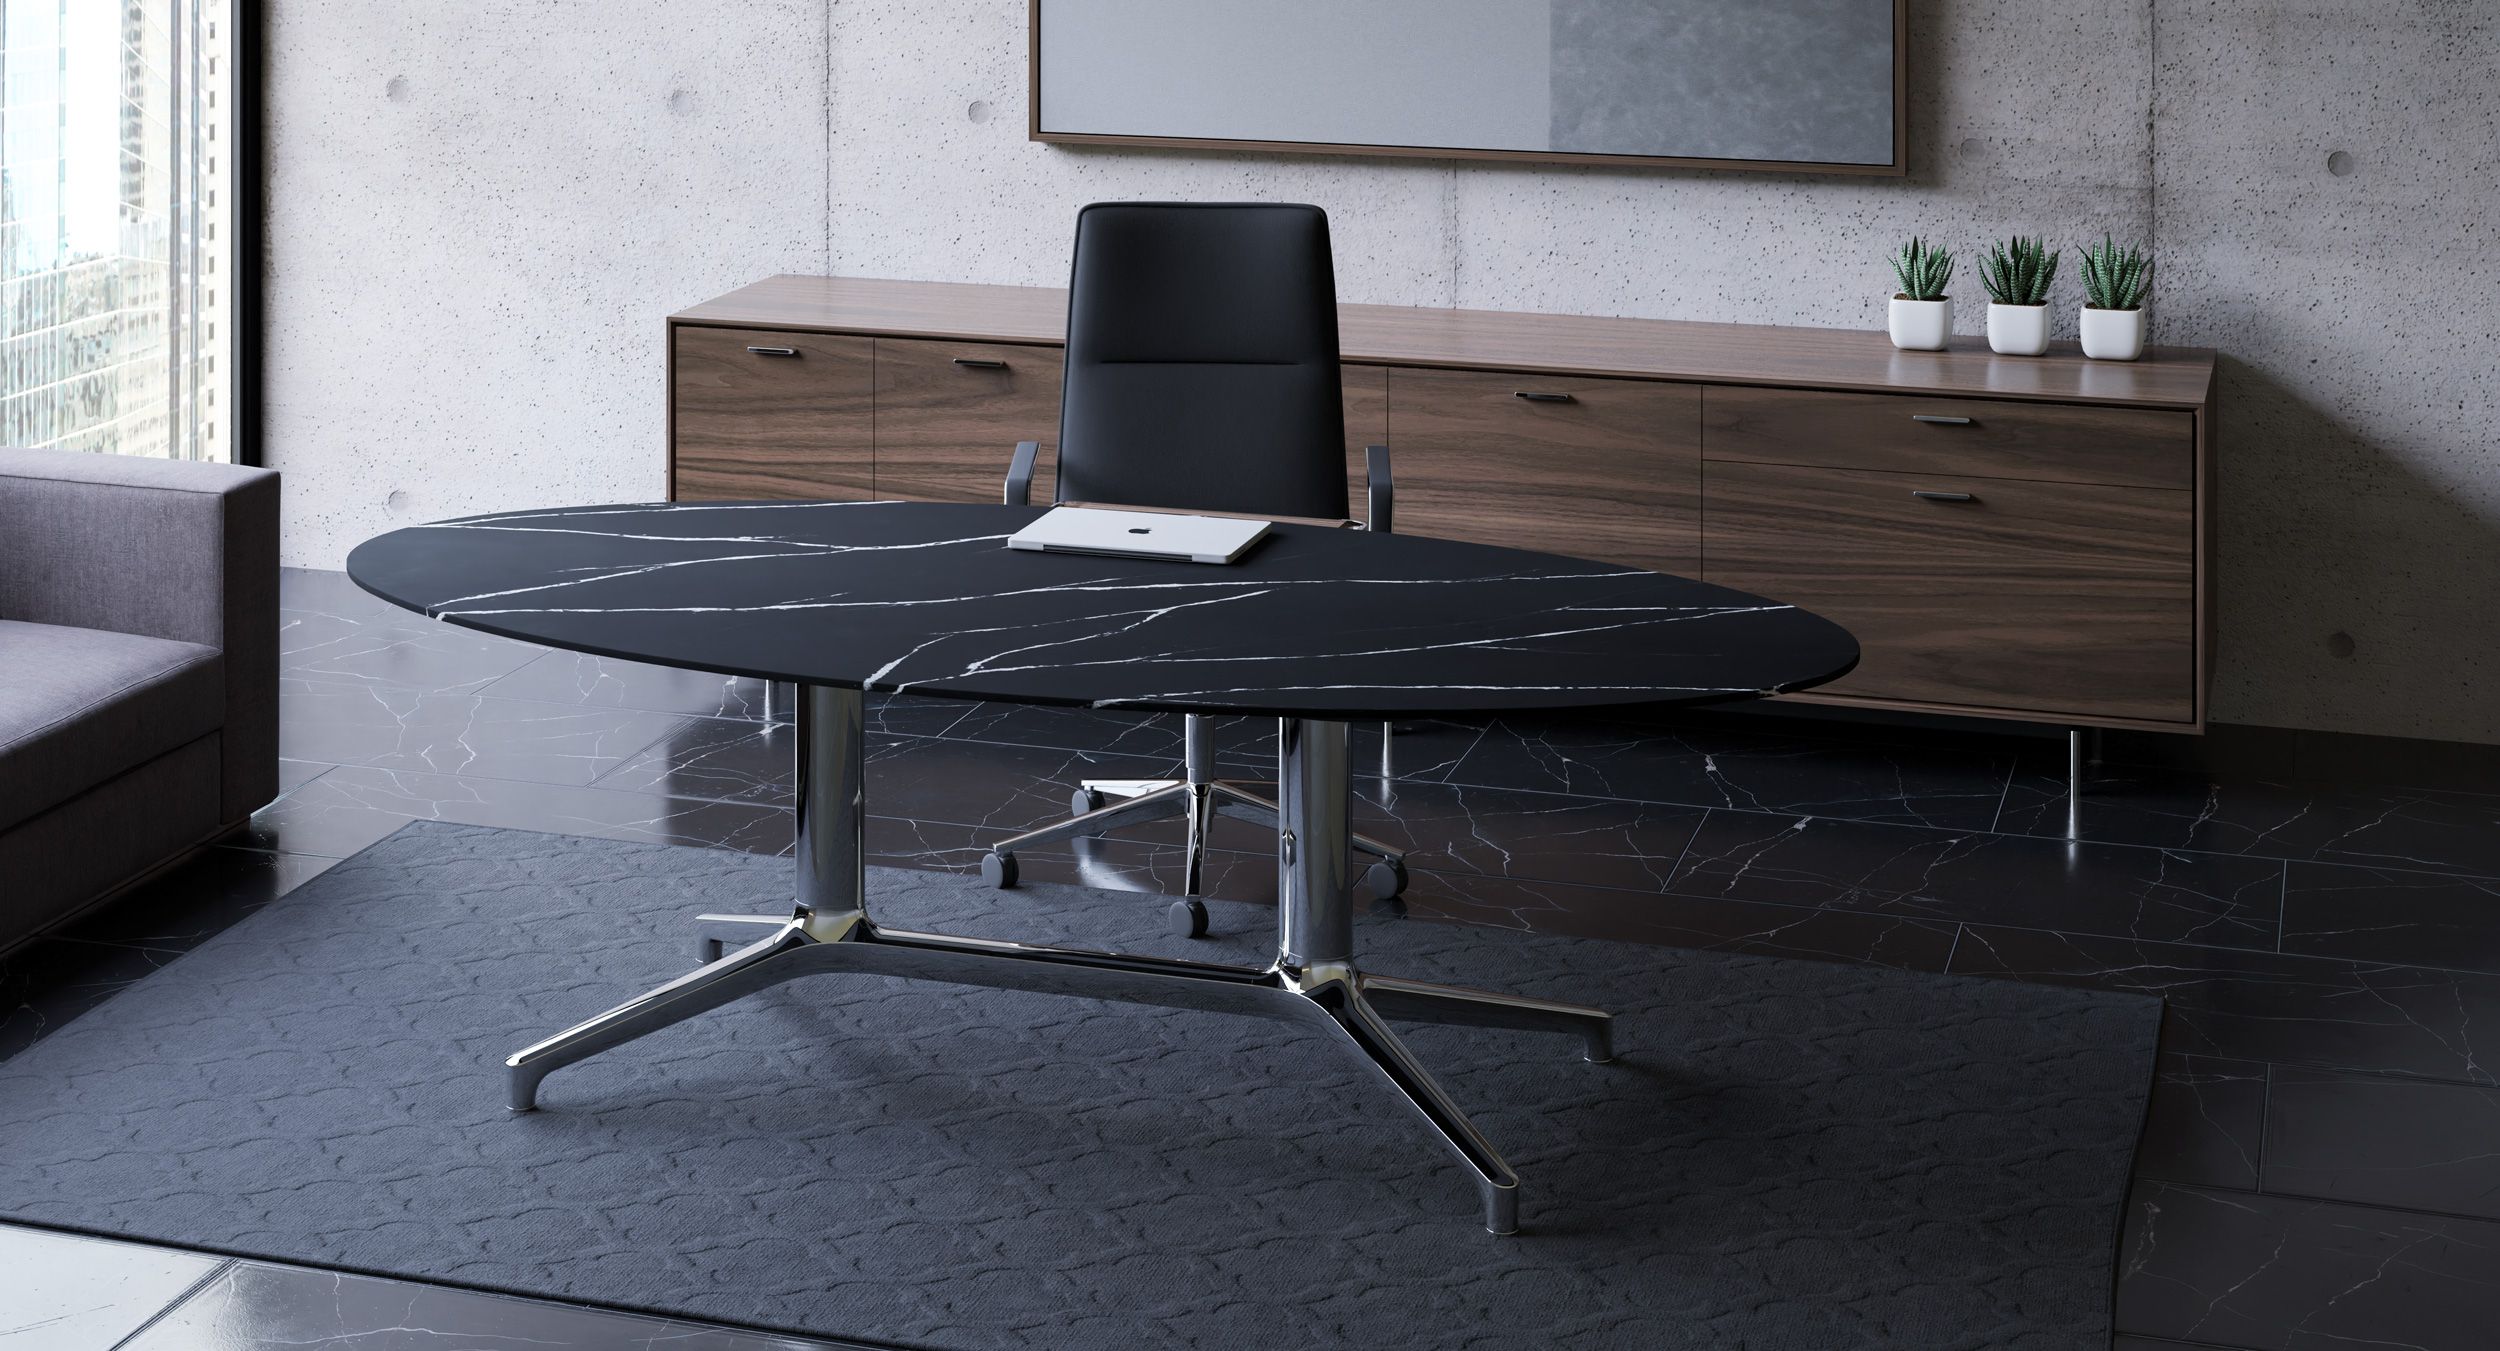 With height-adjustability, technology integration, and a valet drawer to elegantly store work tools, Helm is the
ultimate executive desking solution.